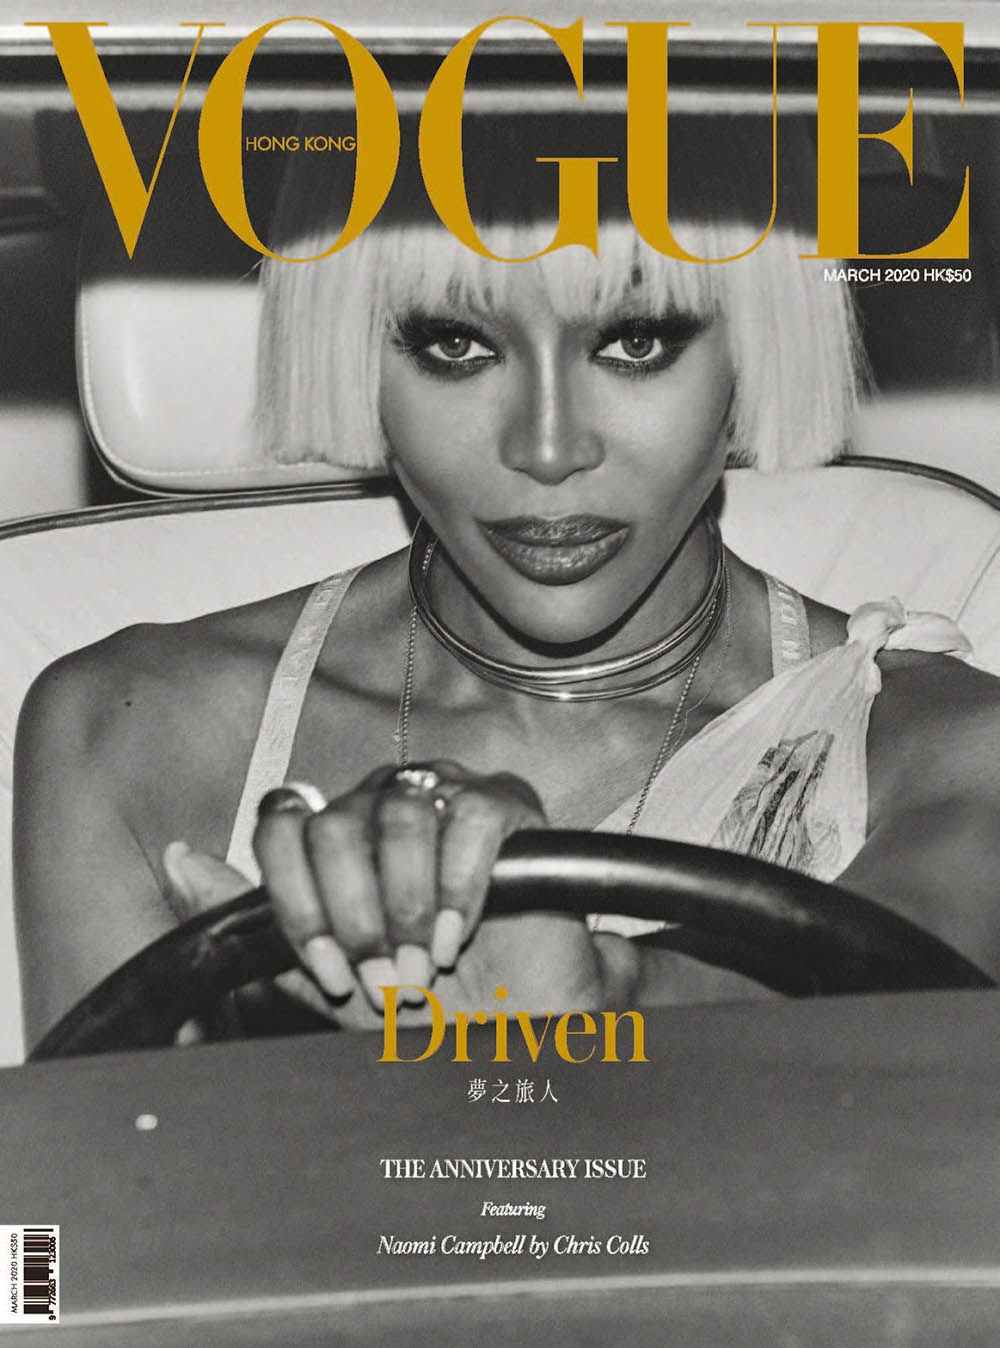 Naomi Campbell covers Vogue Hong Kong March 2020 by Chris Colls